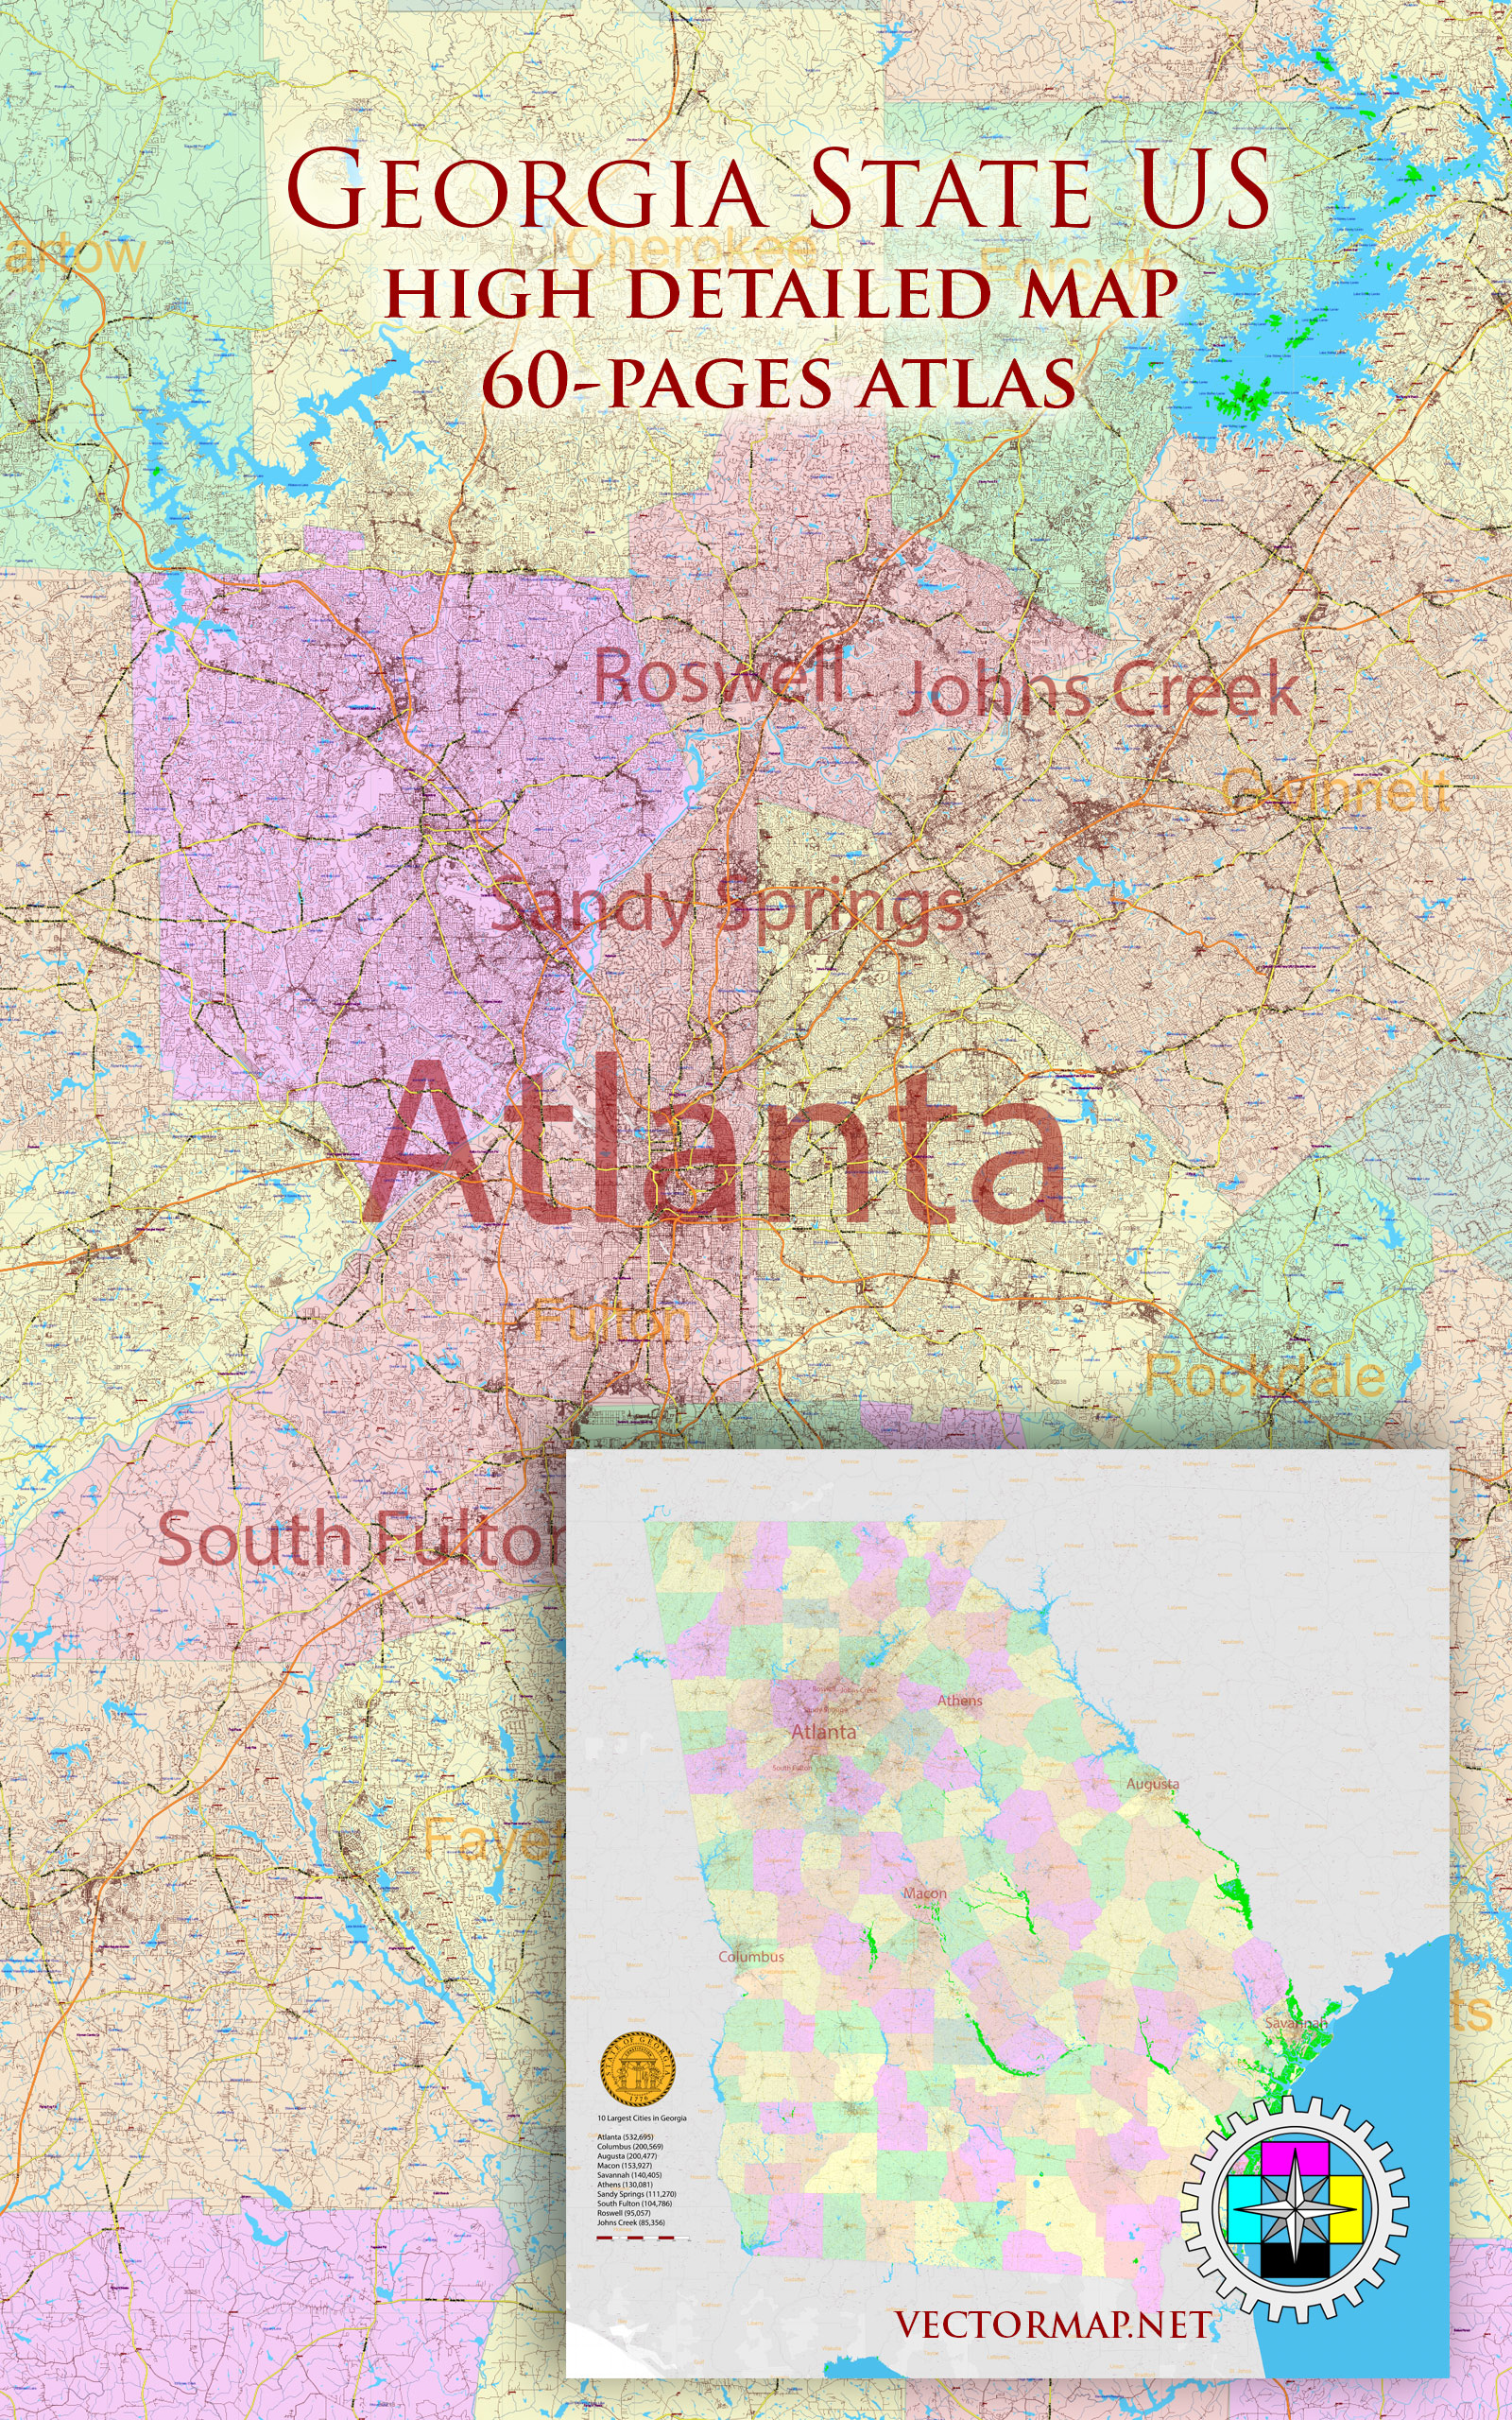 Georgia State US Tourist Map multi-page atlas, contains 60 pages vector PDF